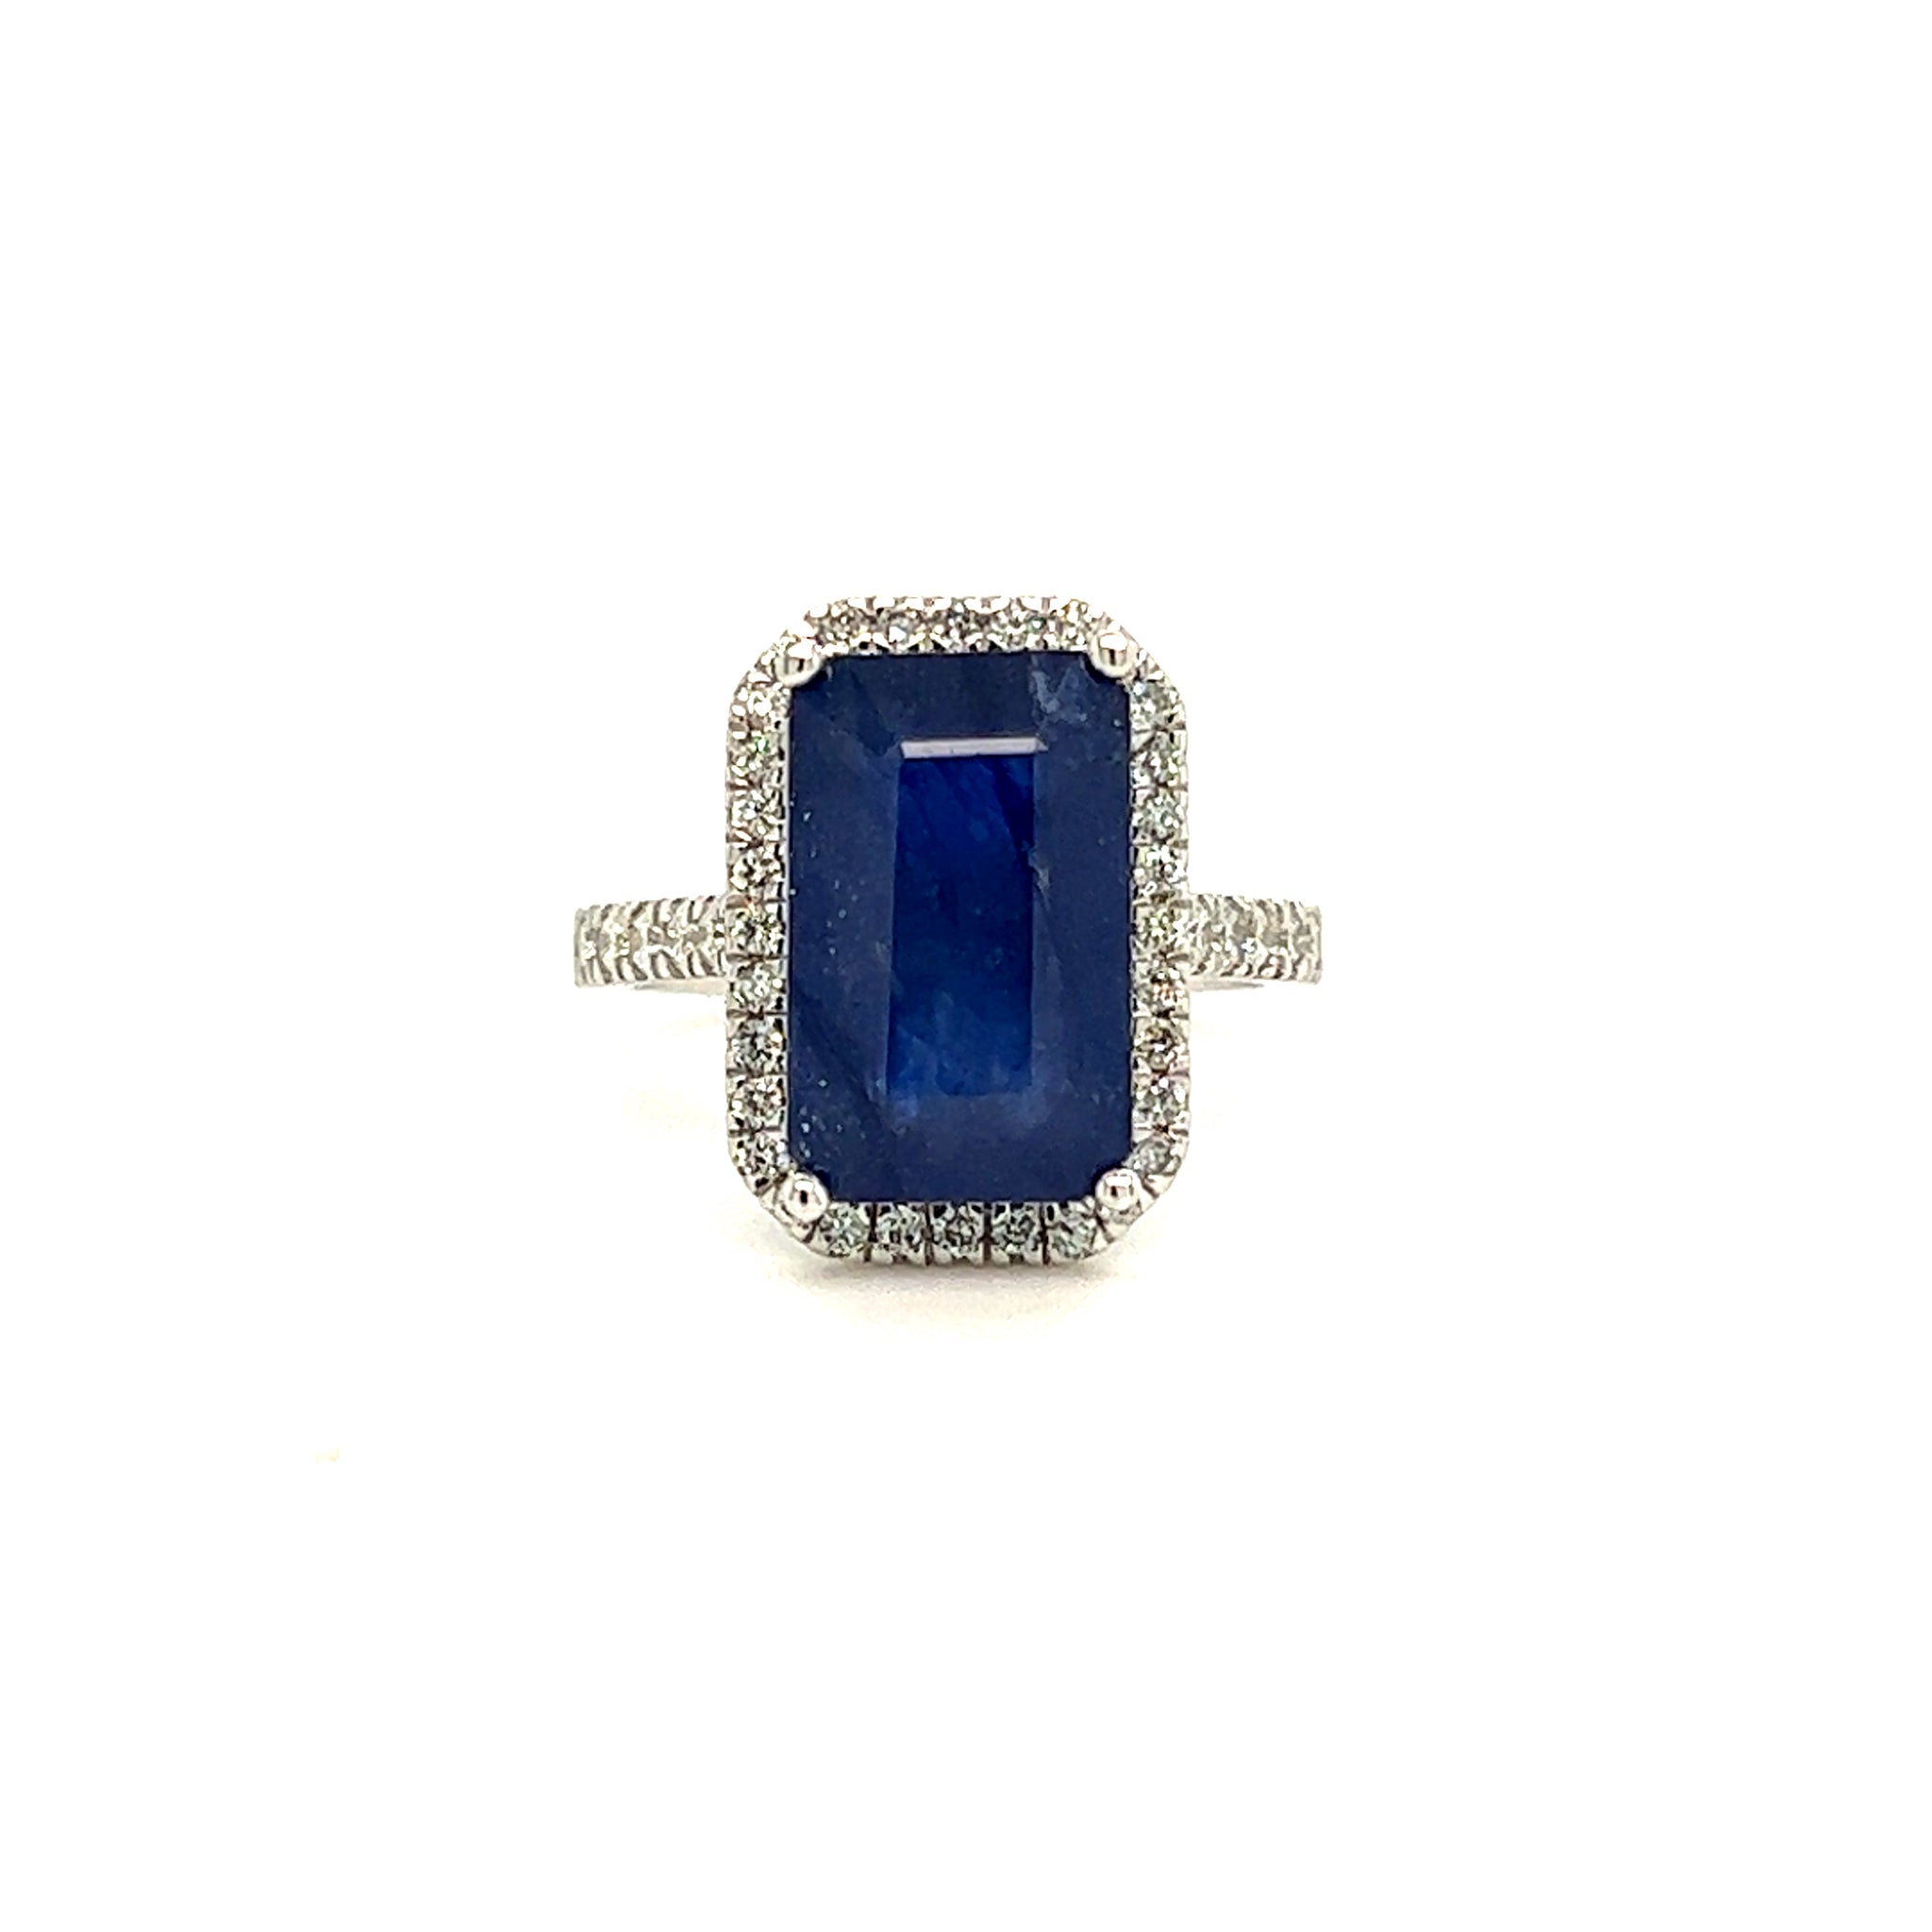 Composite Sapphire Diamond Ring 14k Gold 6.84 TCW Certified $3,200 215421